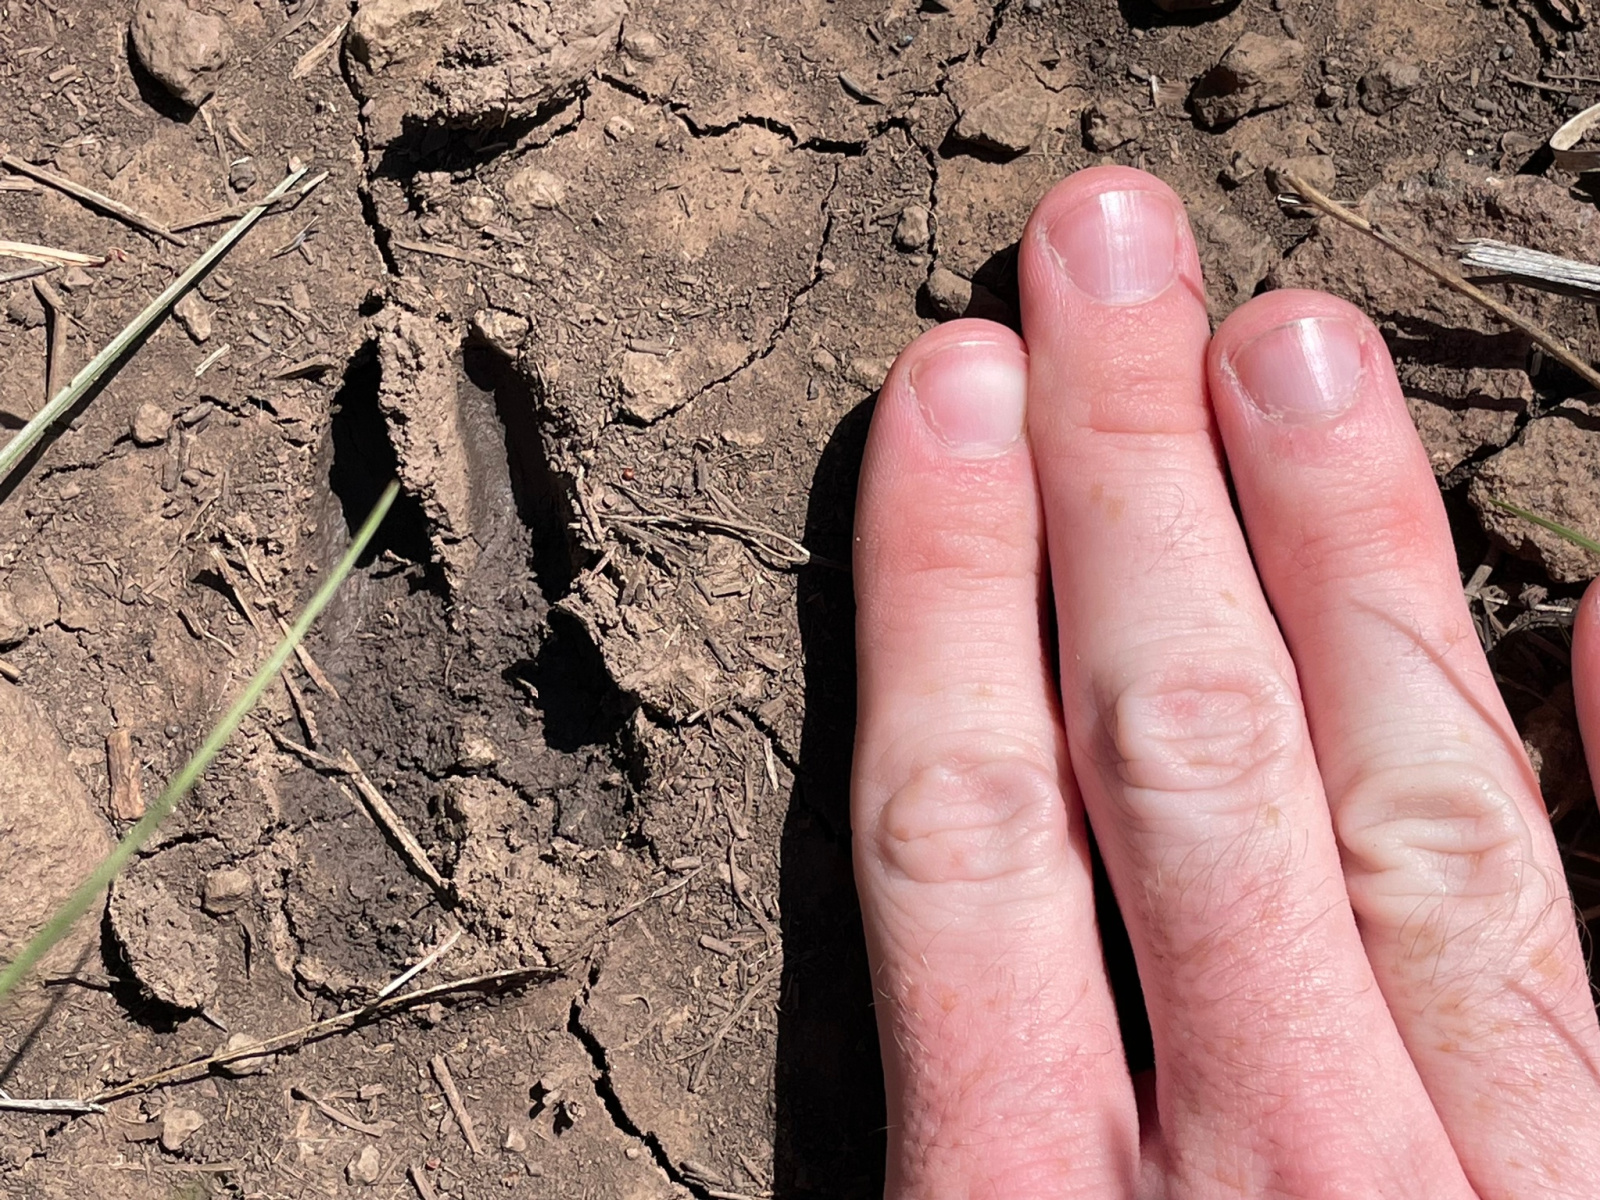 A pronghorn track looks small compared to a human hand.